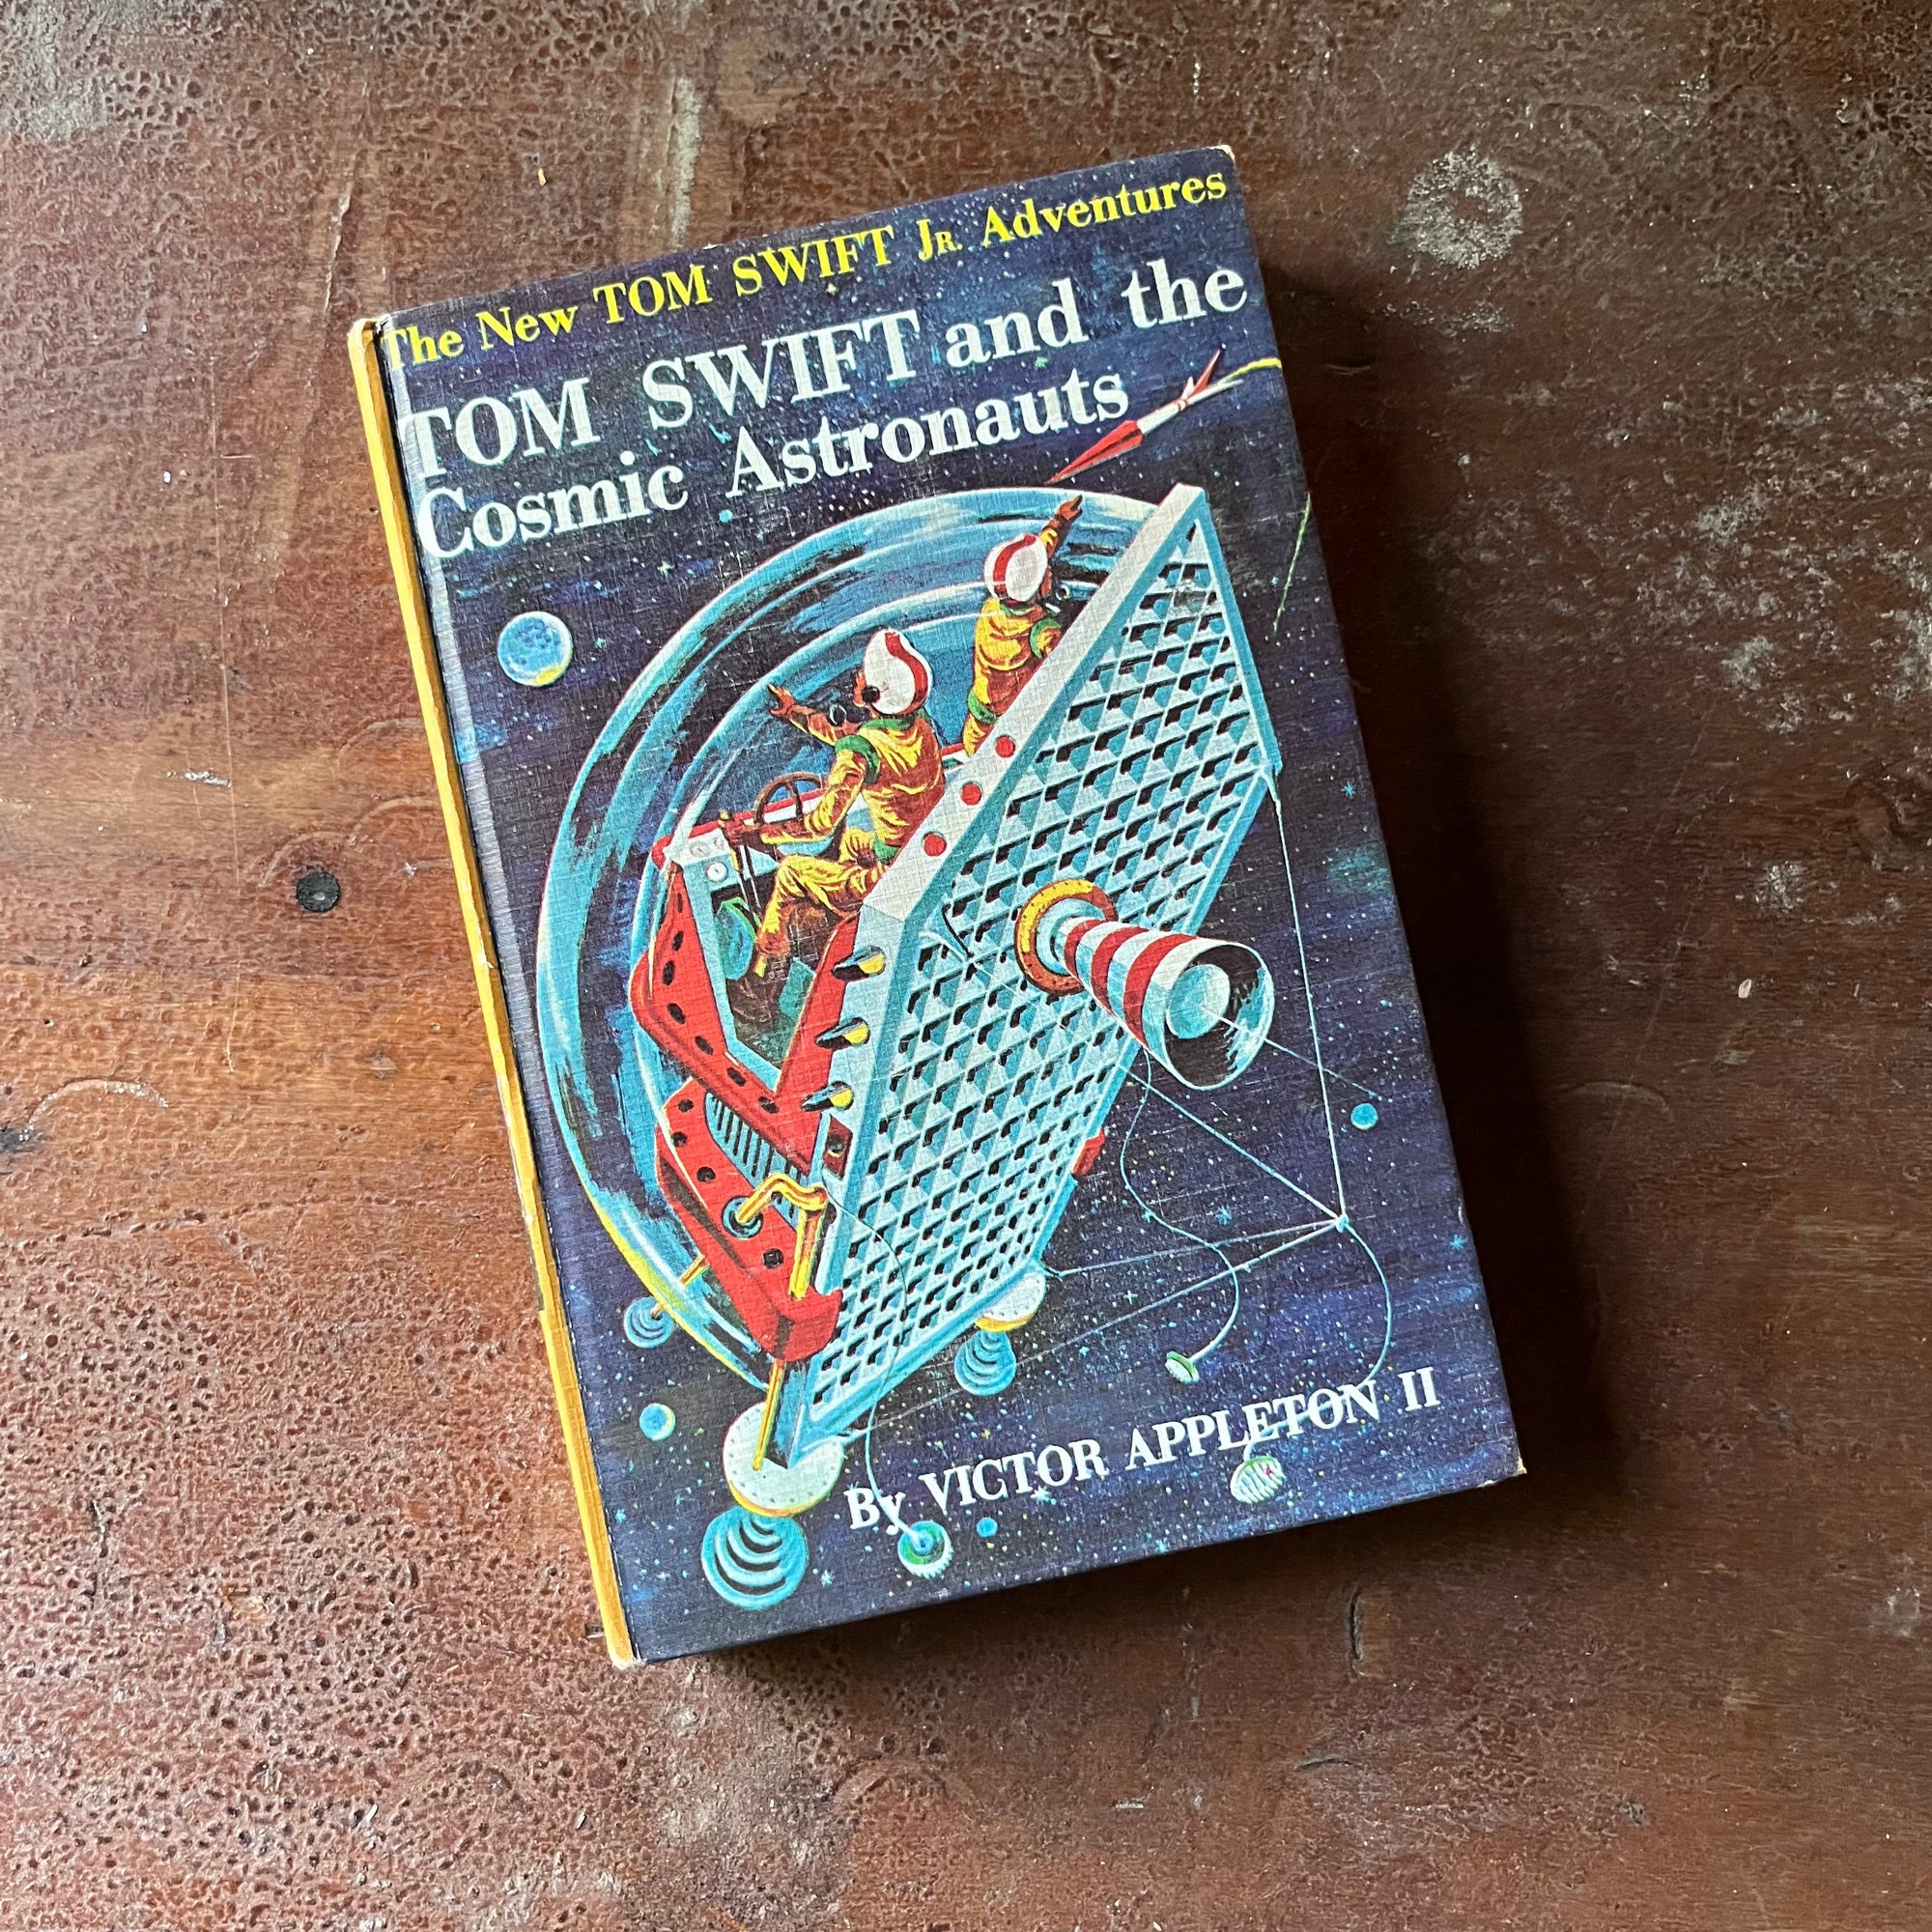 vintage children's chapter book, vintage boy's adventure story, homeschool library, The New Tom Swift Jr. Adventures Book #16 - Tom Swift and the Cosmic Astronauts written by Victor Appleton II with Illustrations by Graham Kaye - view of the front cover